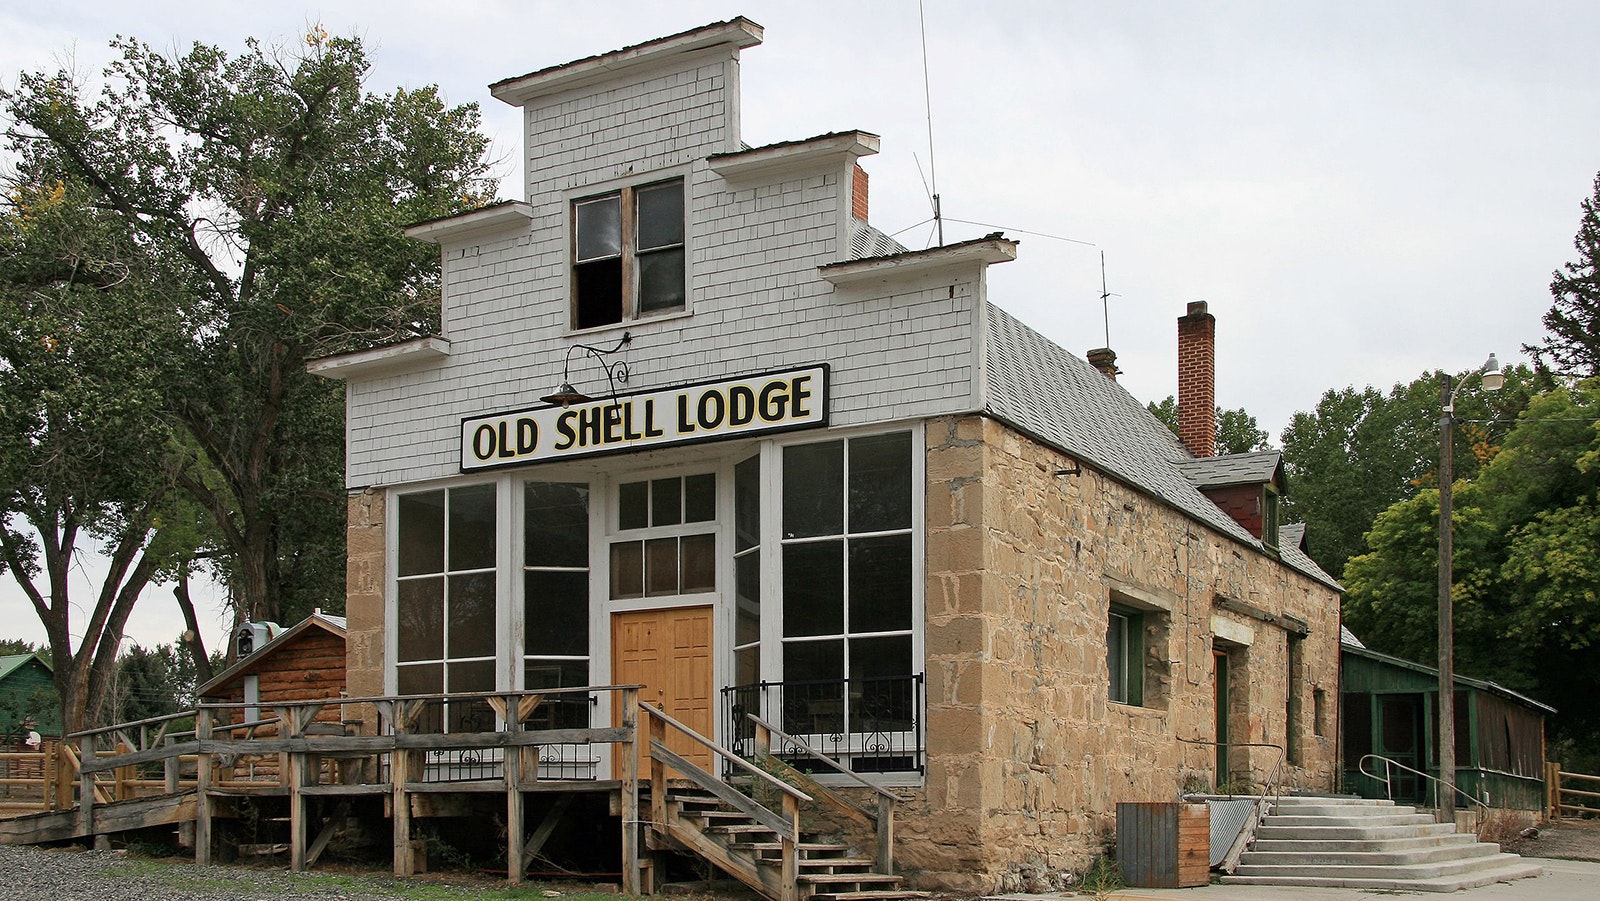 The Shell Store has been a fixture of the Shell community for more than 125 years.